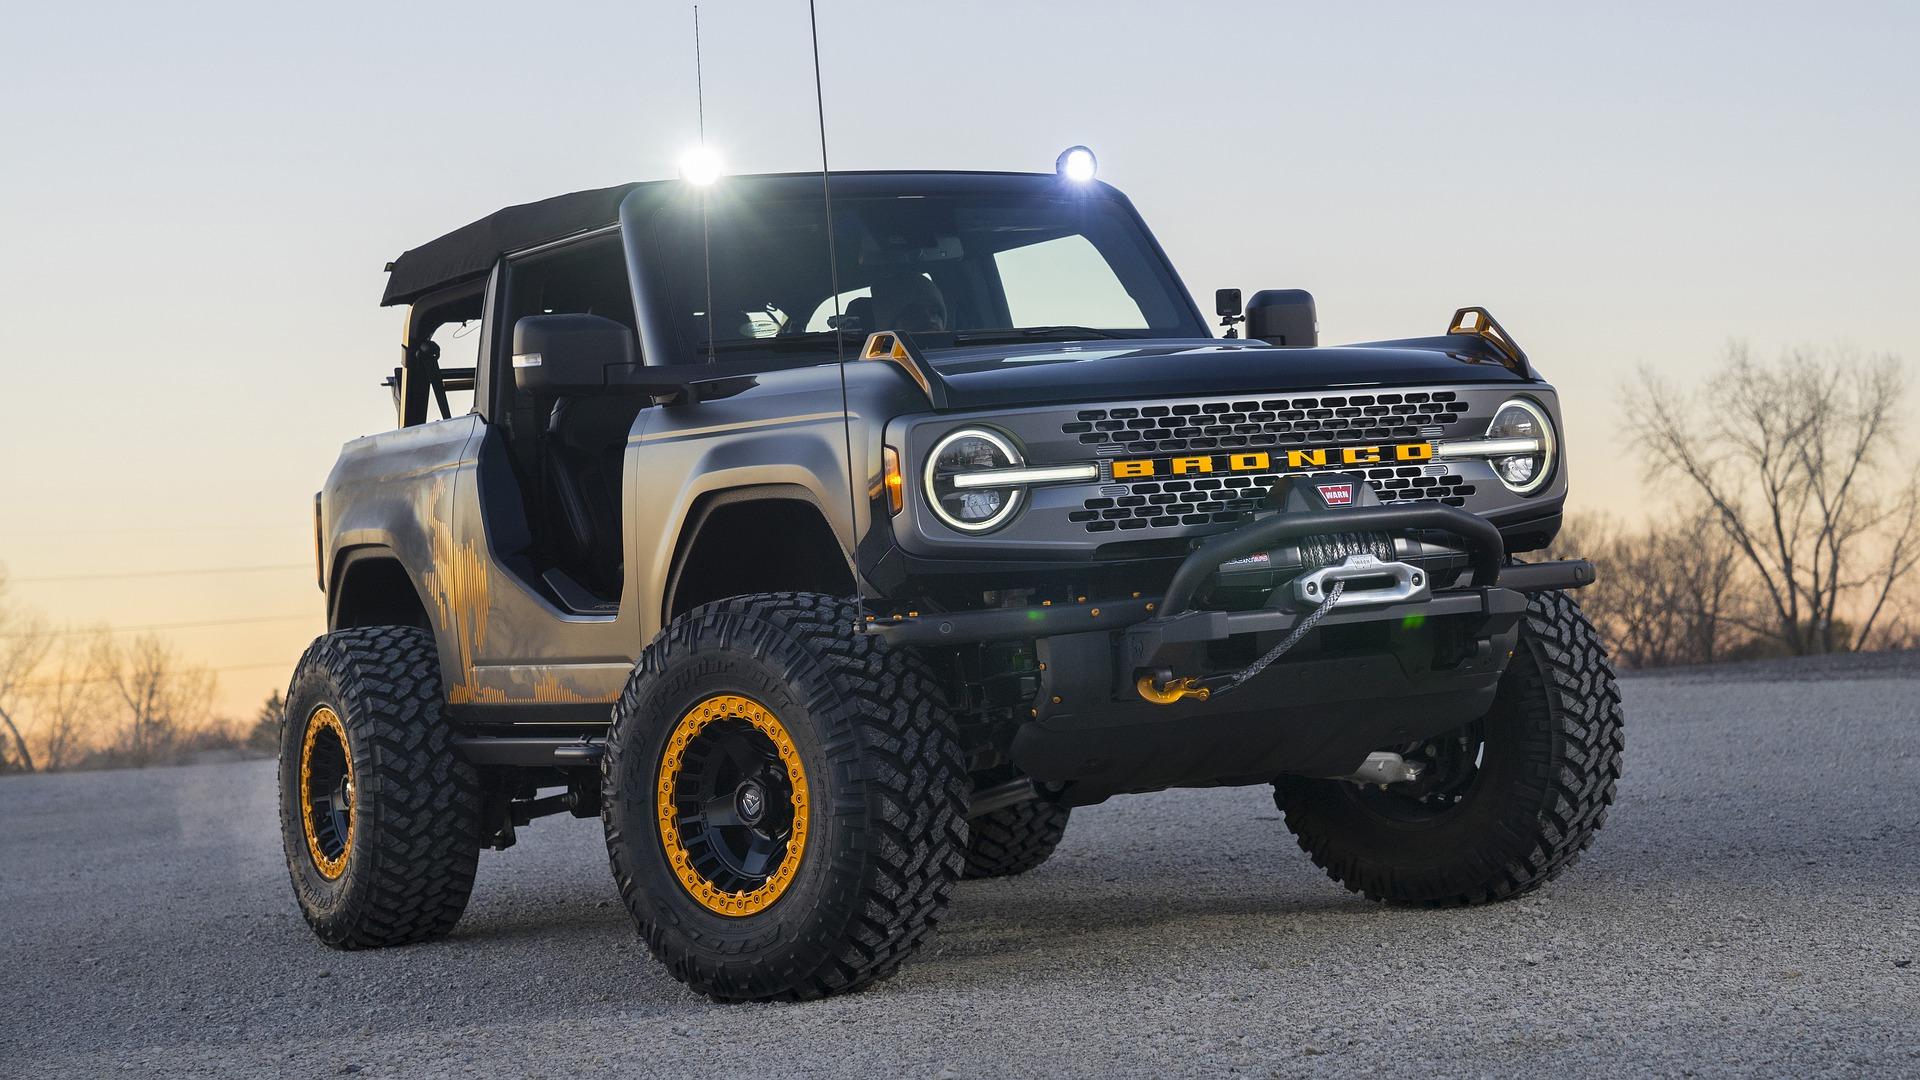 How do you decide between the Jeep Wrangler vs the Ford Bronco?